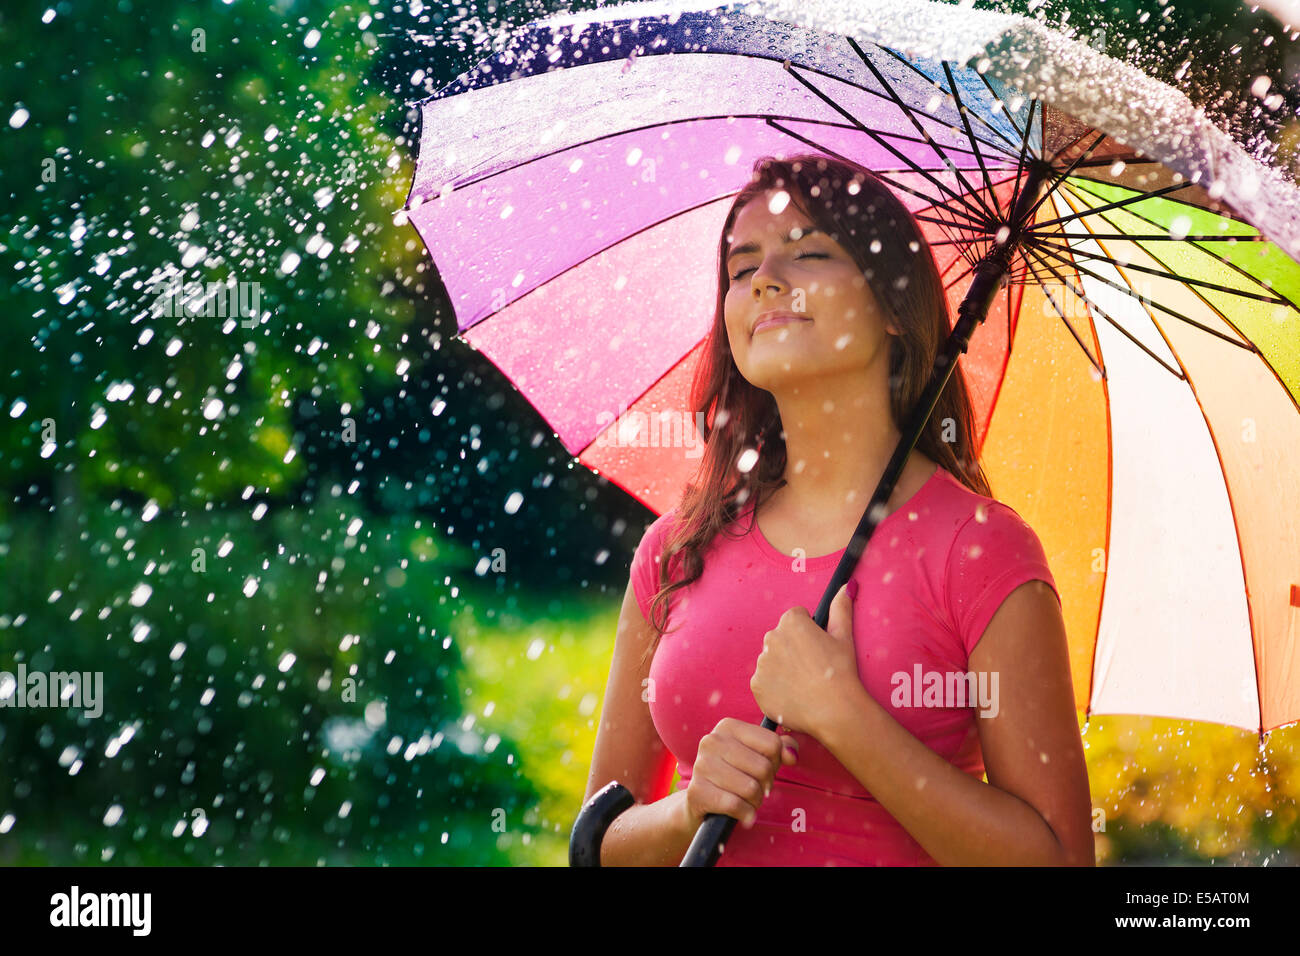 Young woman breathing fresh air during the spring rain  Debica, Poland Stock Photo